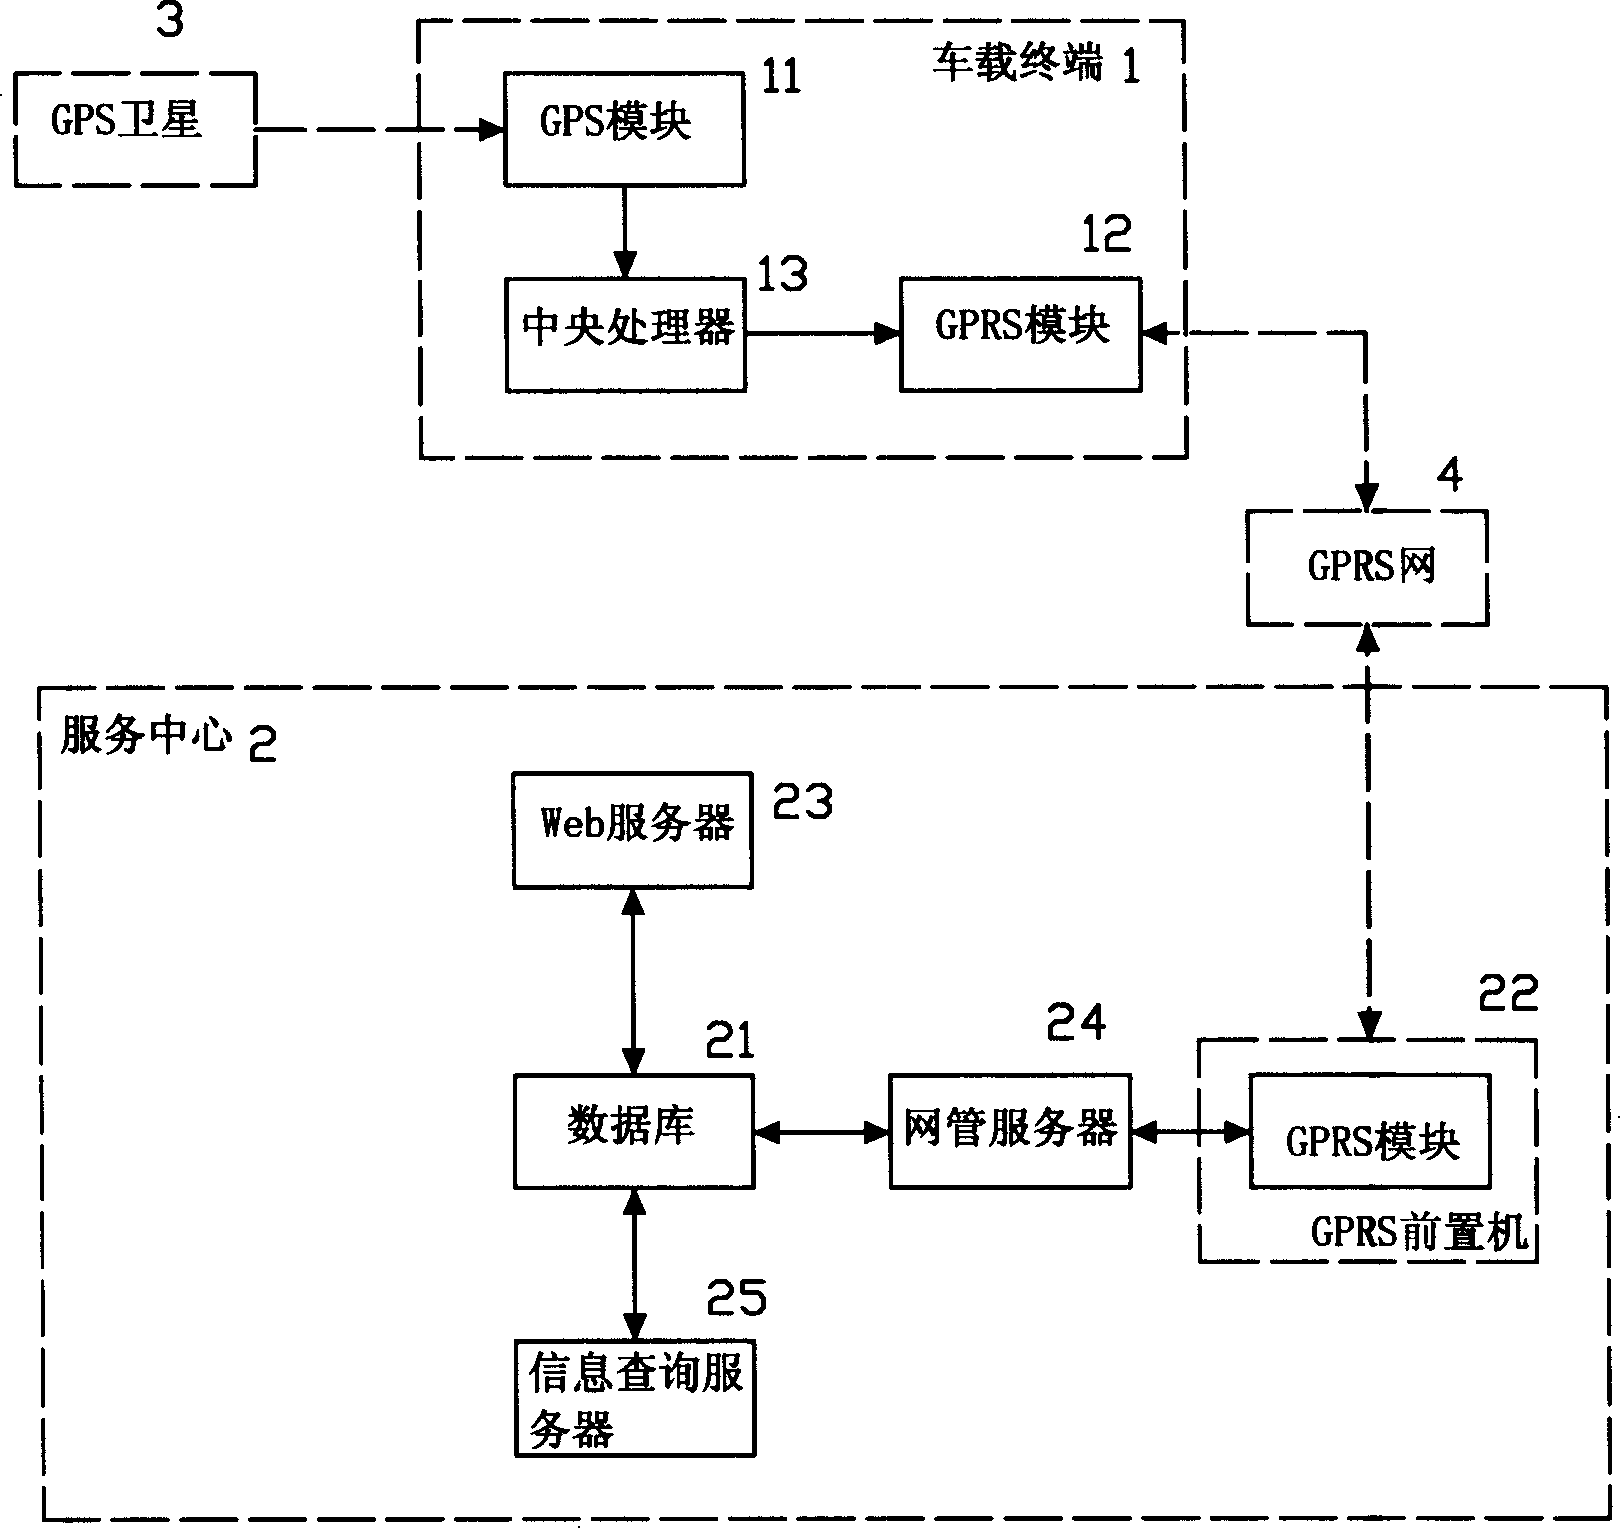 Vehicle parking statistical method based on wireless transmission technique